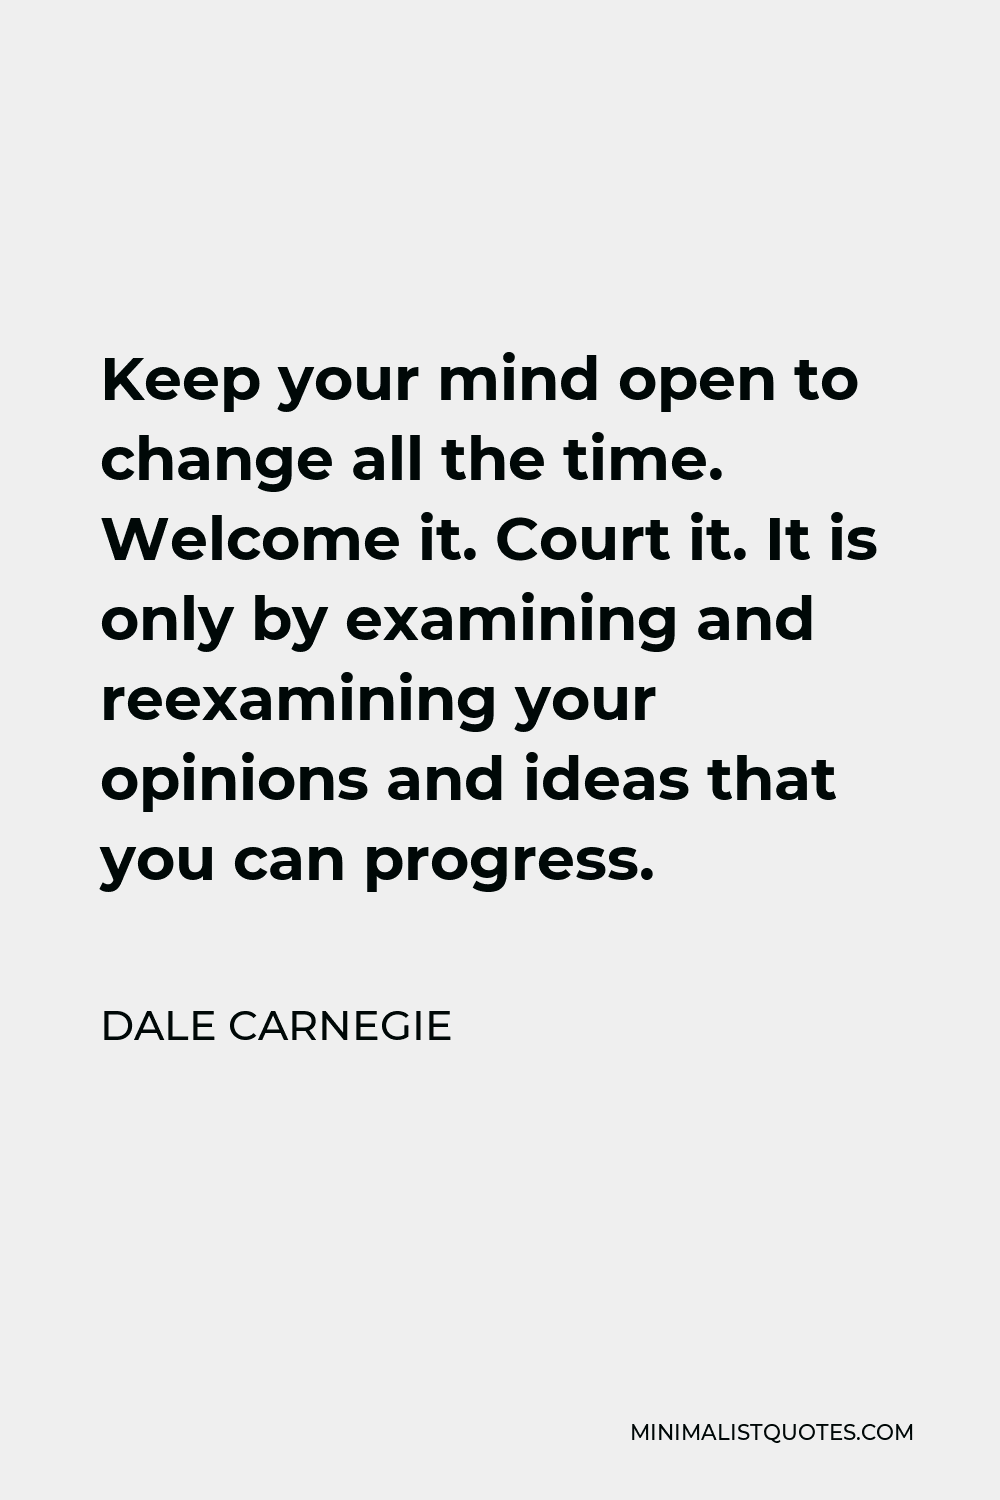 Dale Carnegie Quote - Keep your mind open to change all the time. Welcome it. Court it. It is only by examining and reexamining your opinions and ideas that you can progress.